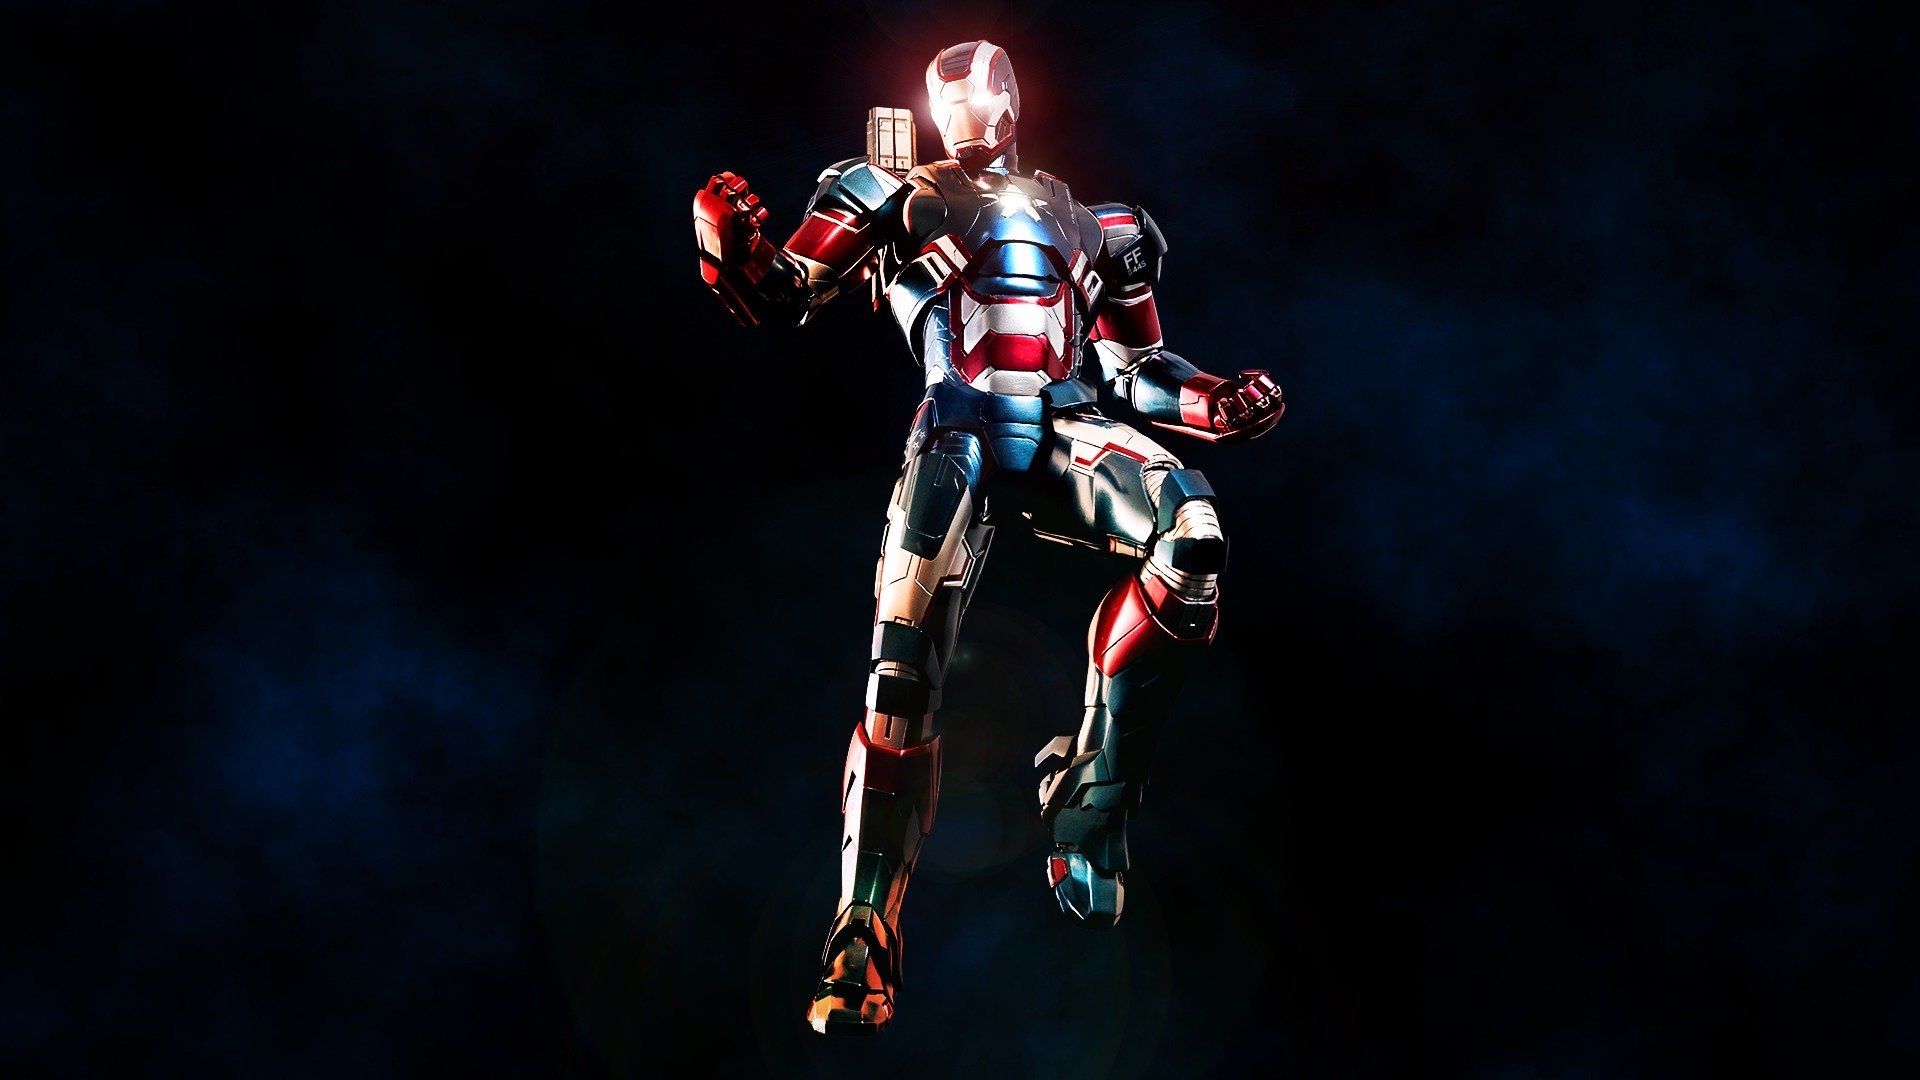 Download full hd Iron Man 3 PC background ID:400993 for free